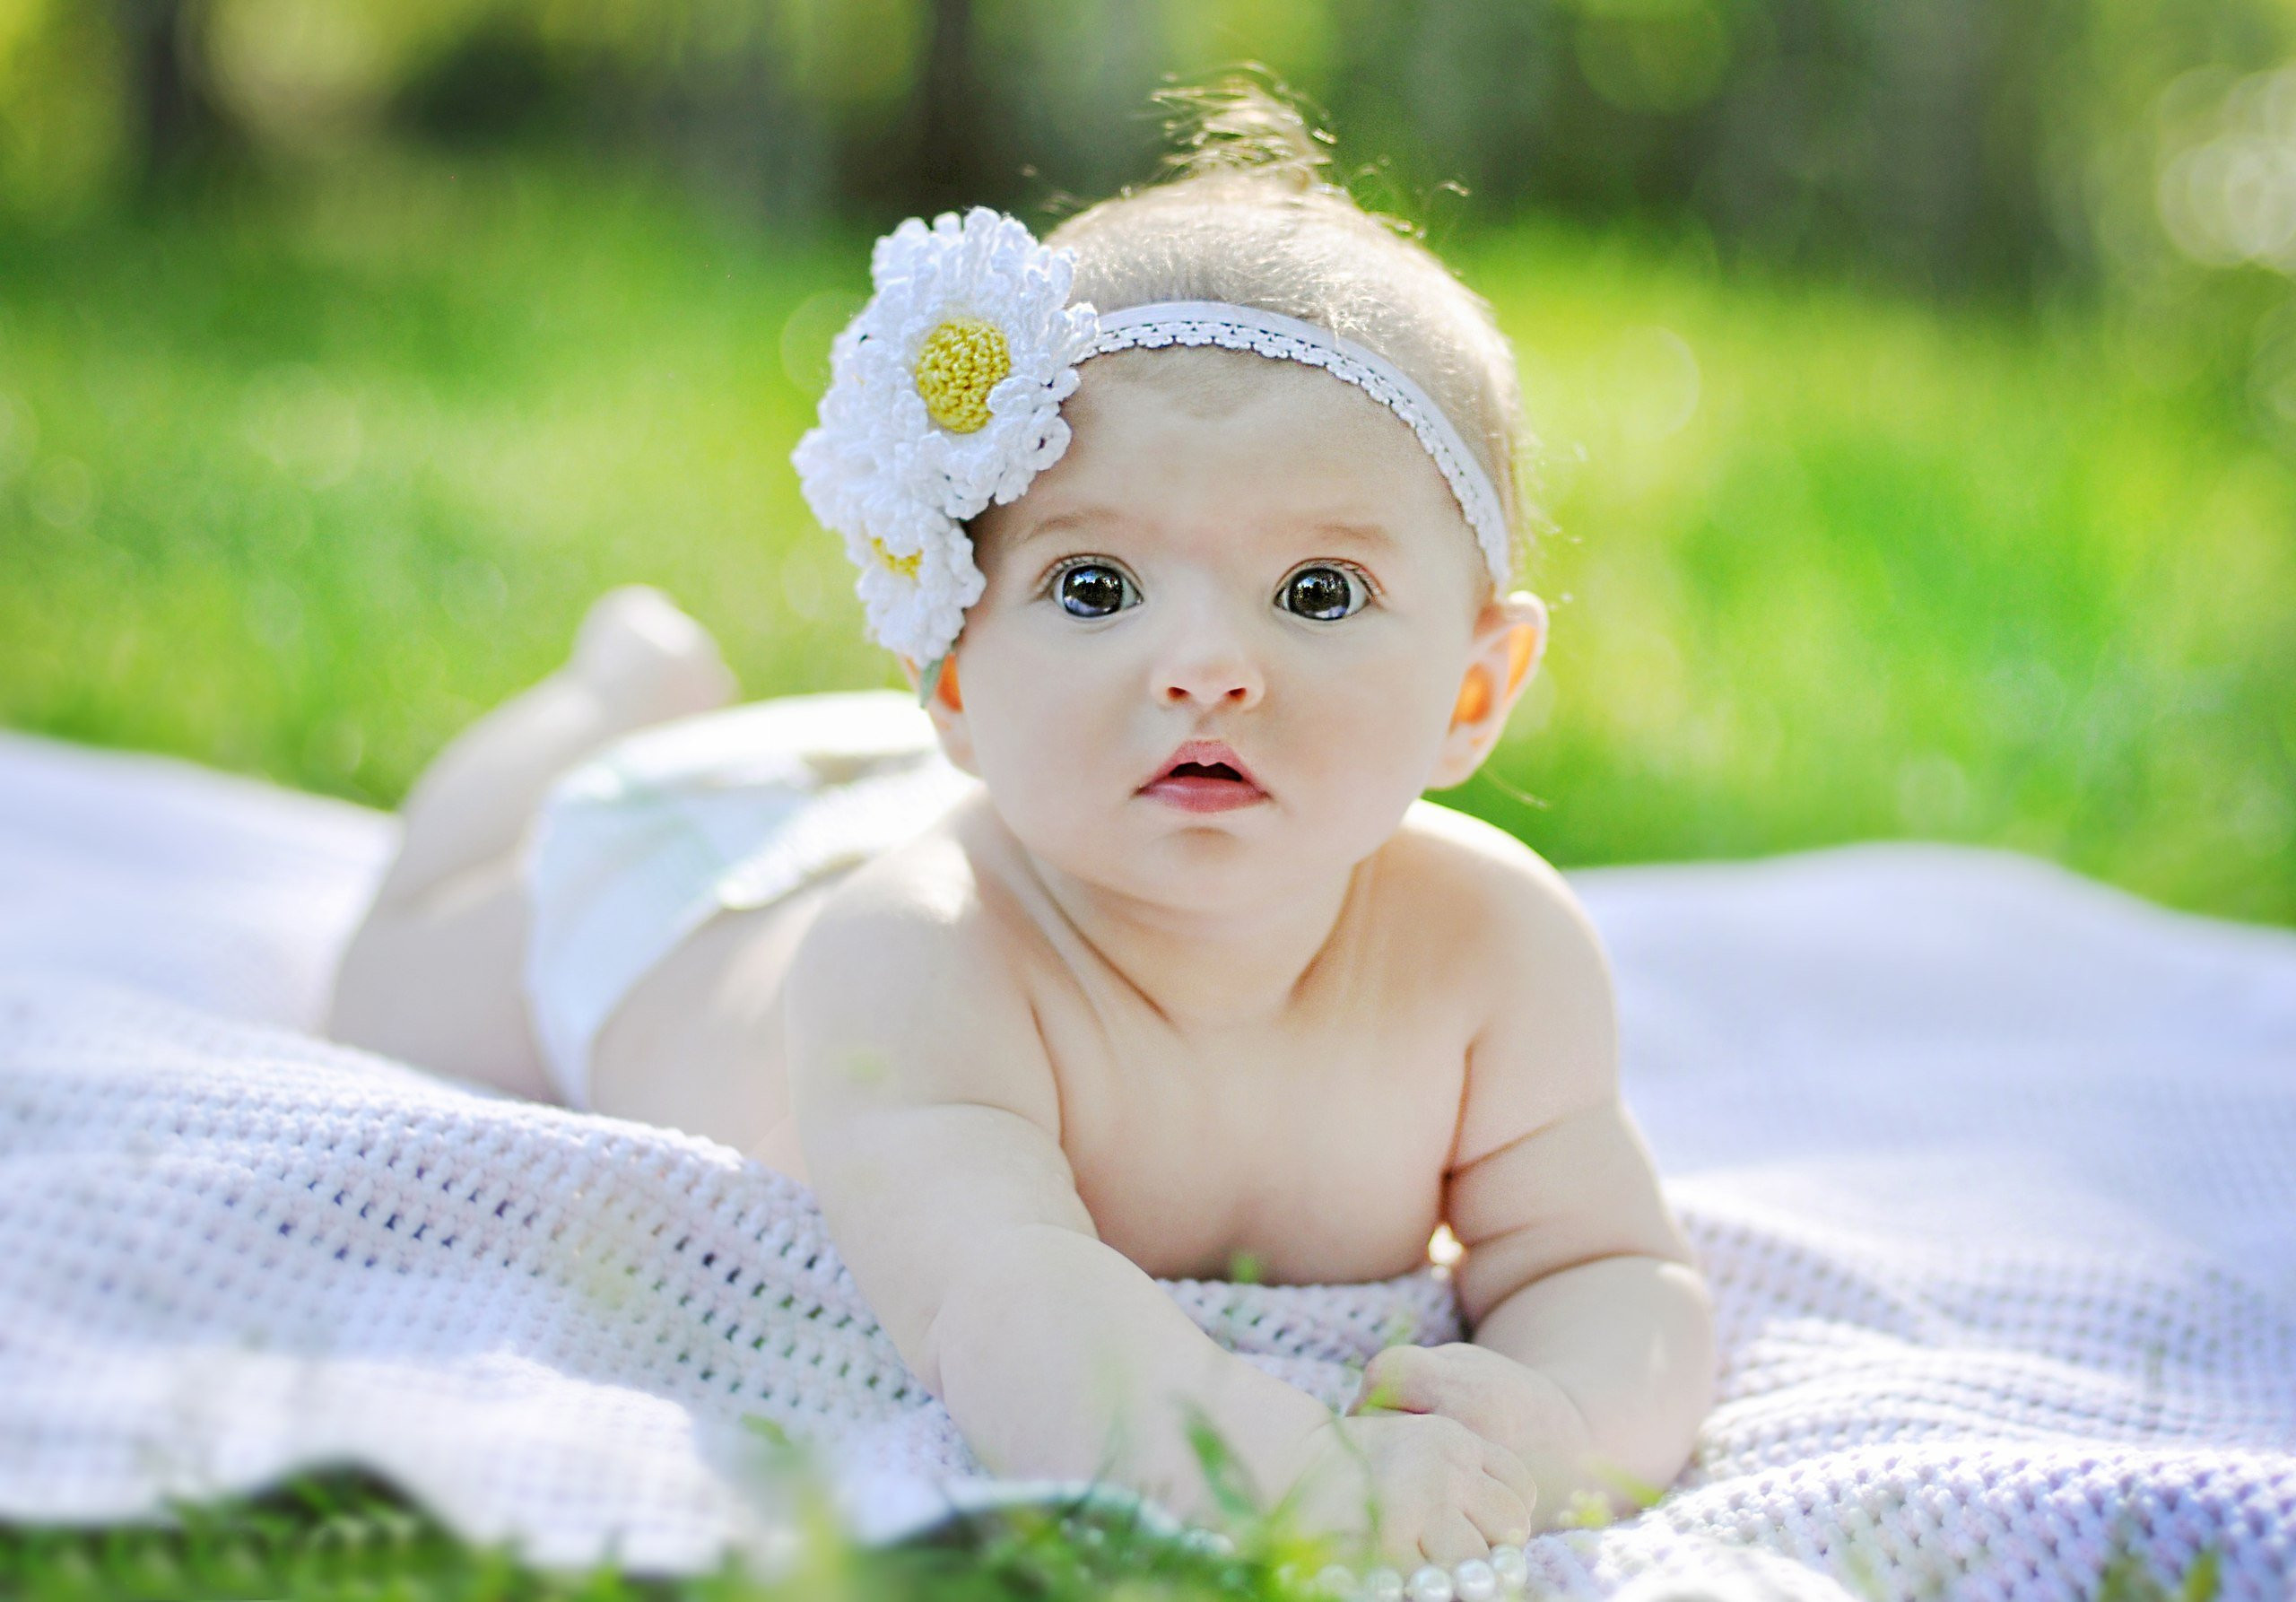 2560x1786 Wallpaper Baby Girl Child Child Baby Wallpapers Group (72+)